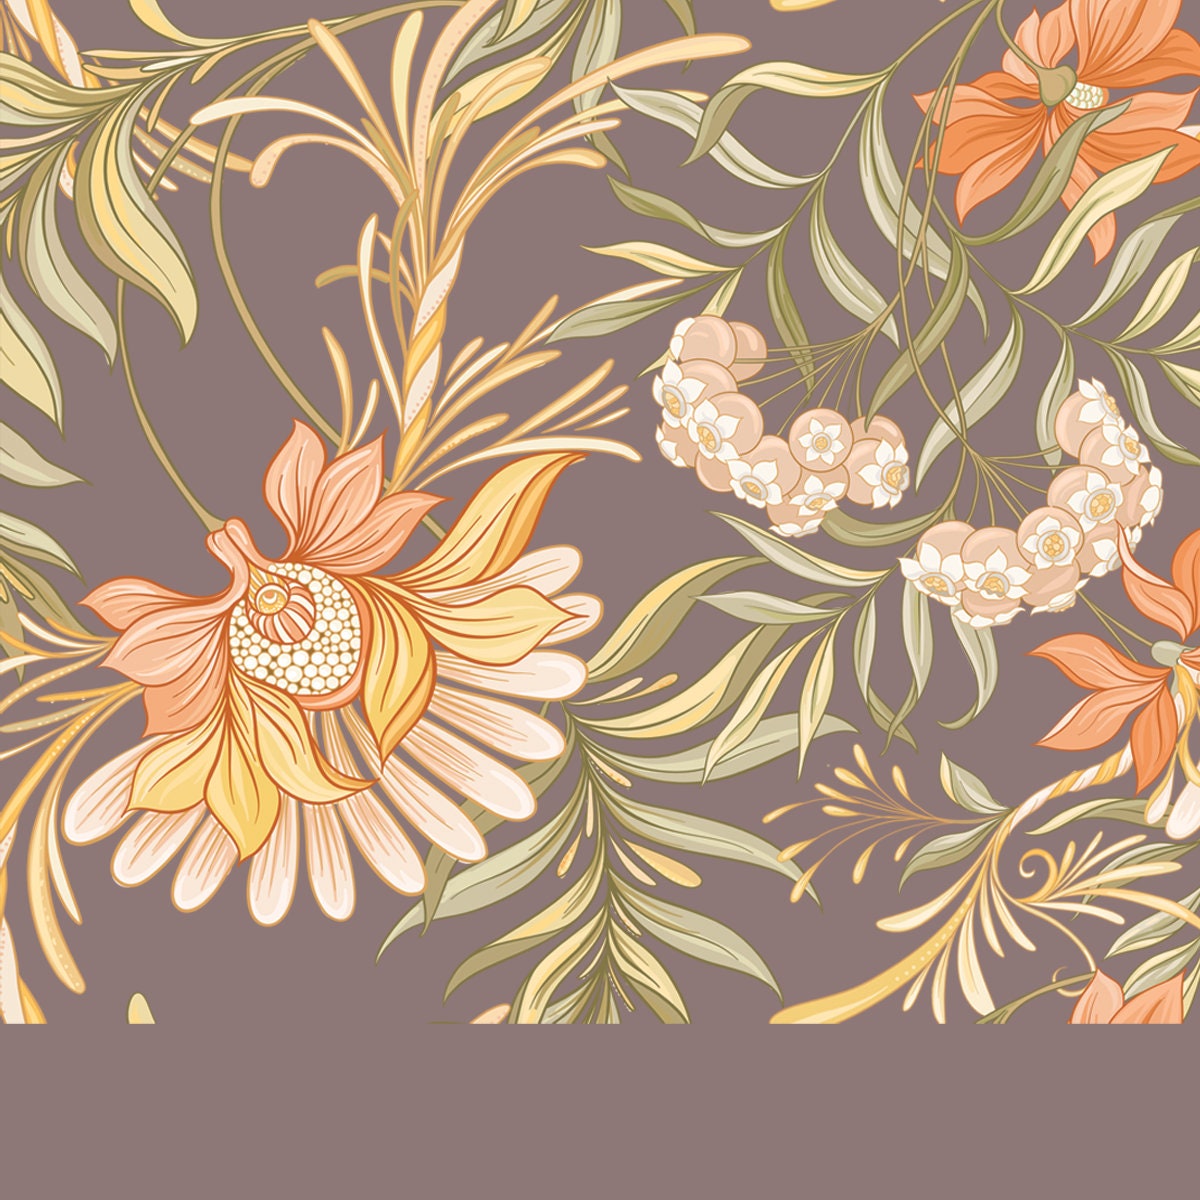 Seamless Pattern, Background with Decorative Flowers in Art Nouveau Style, Vintage, Old, Retro Style Wallpaper Dining Room Mural